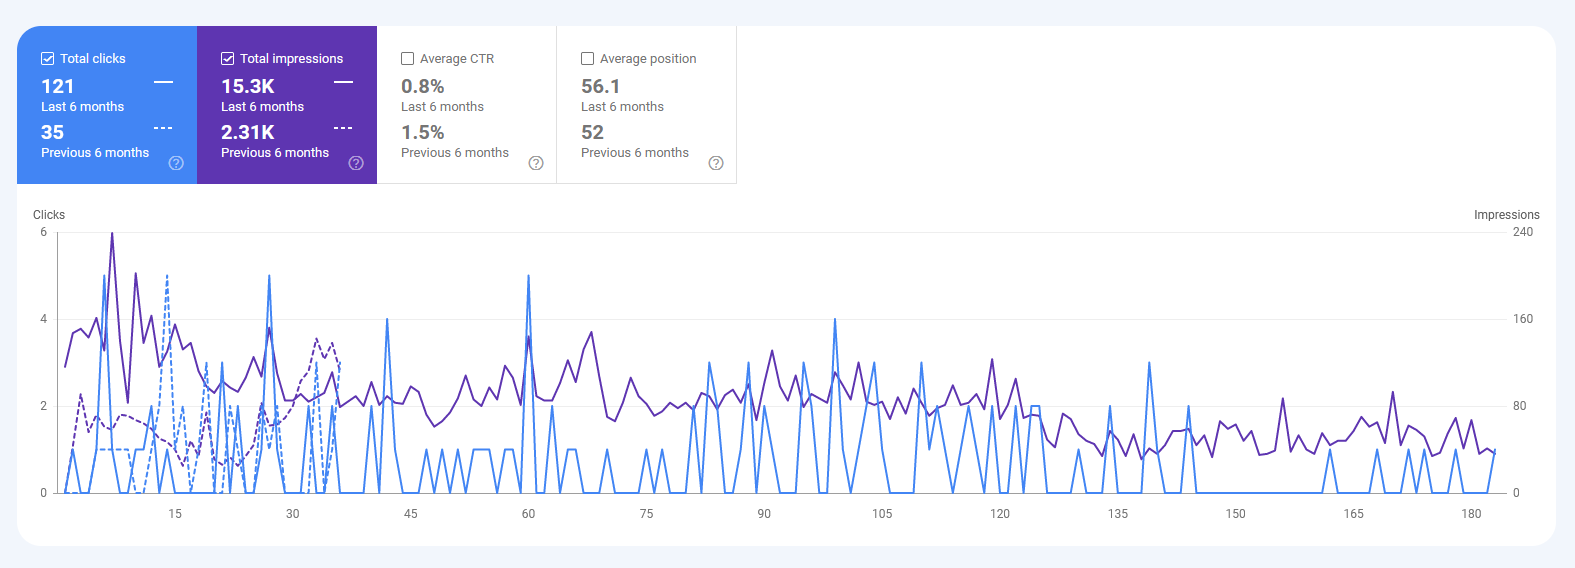 A screenshot of a Google Analytics dashboard displaying various analytics data on the right side.